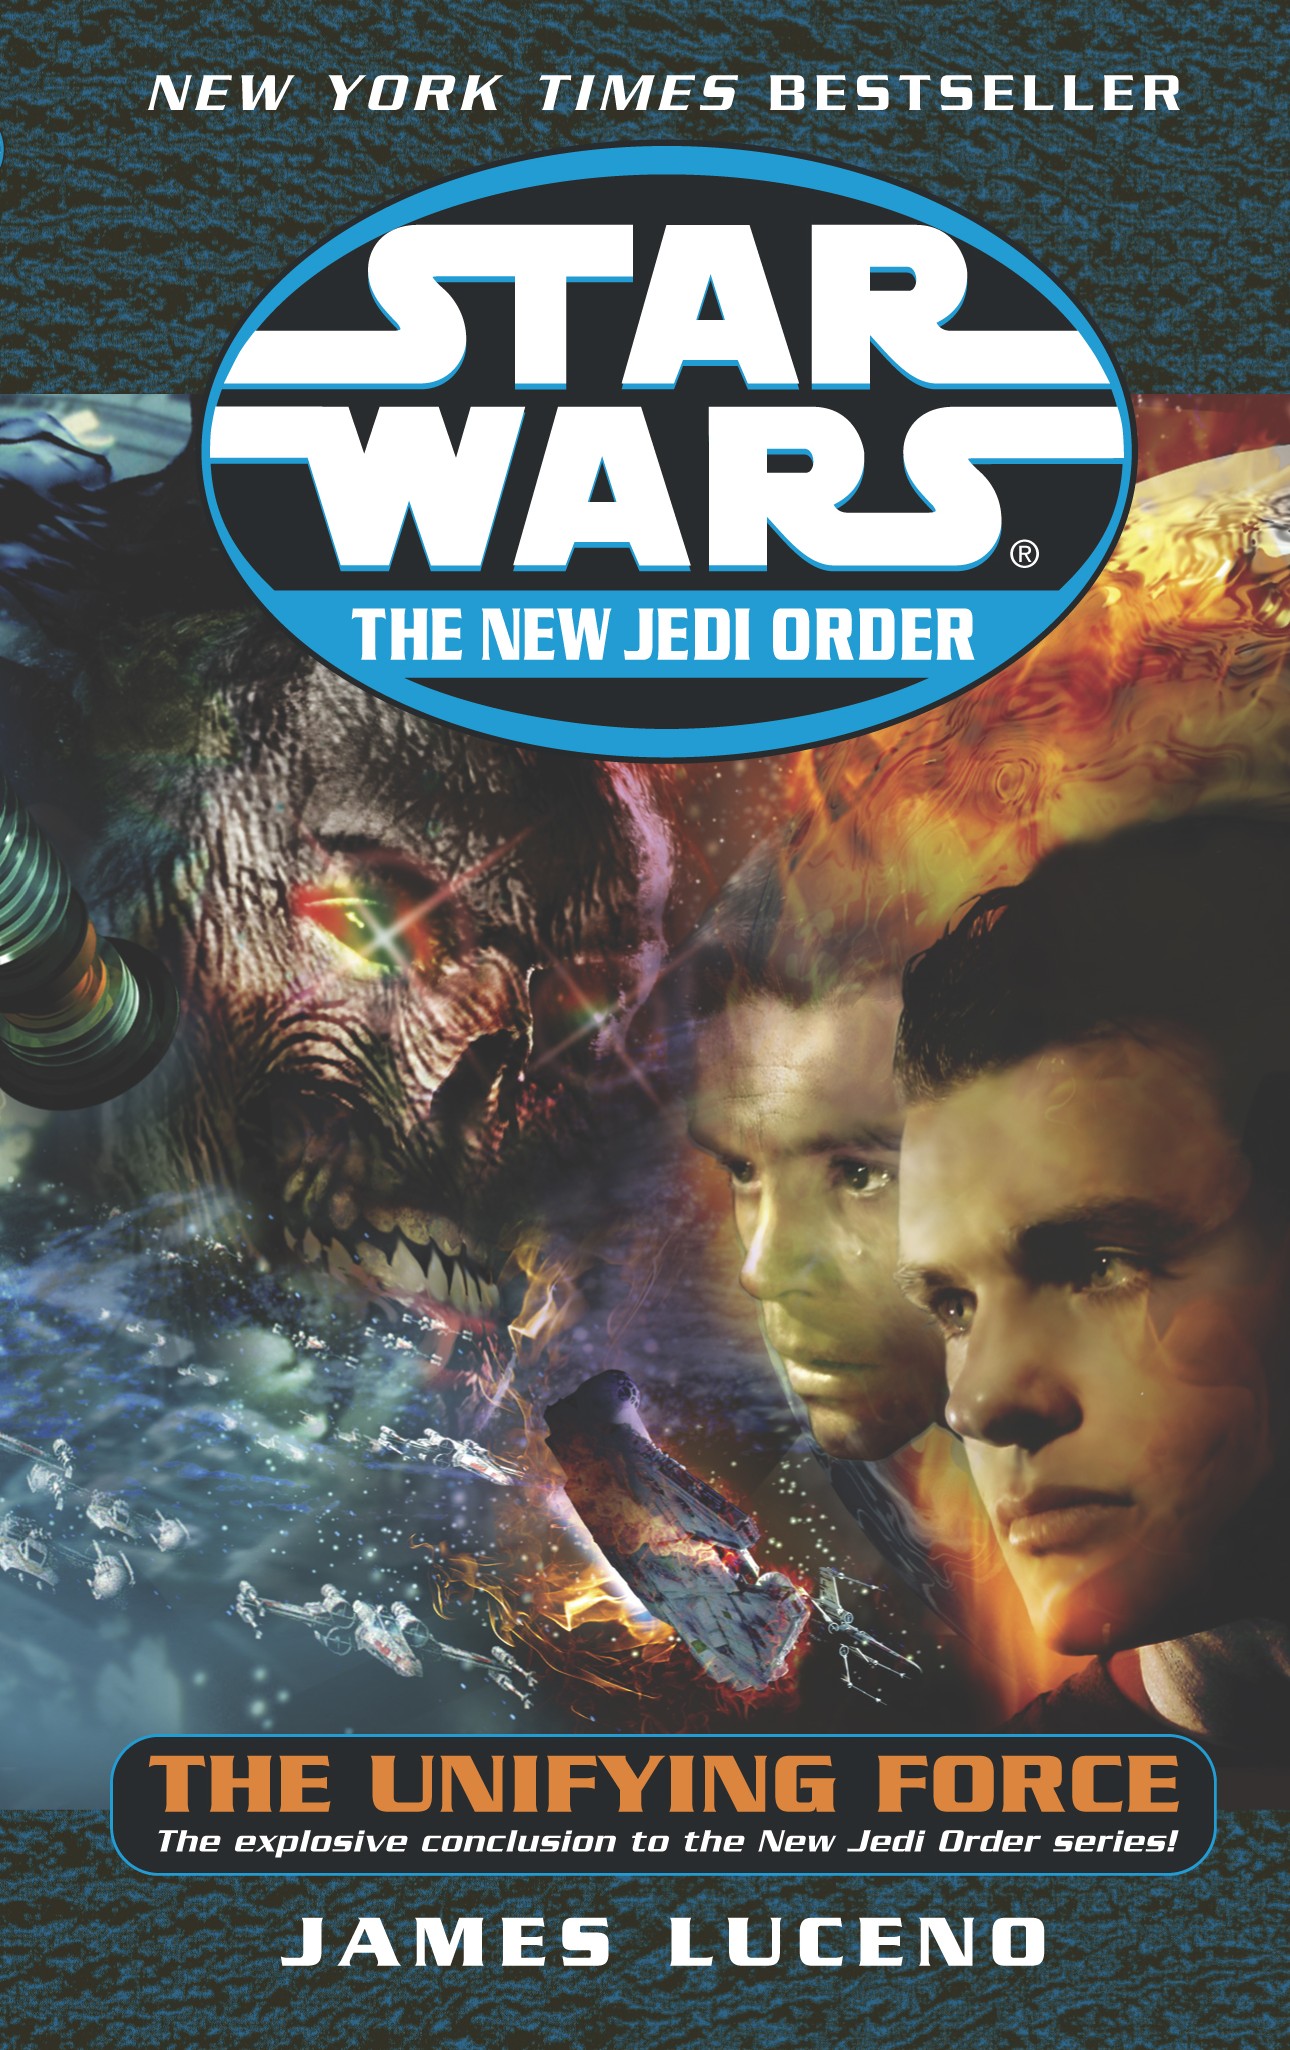 New Jedi Order: The Unifying Force